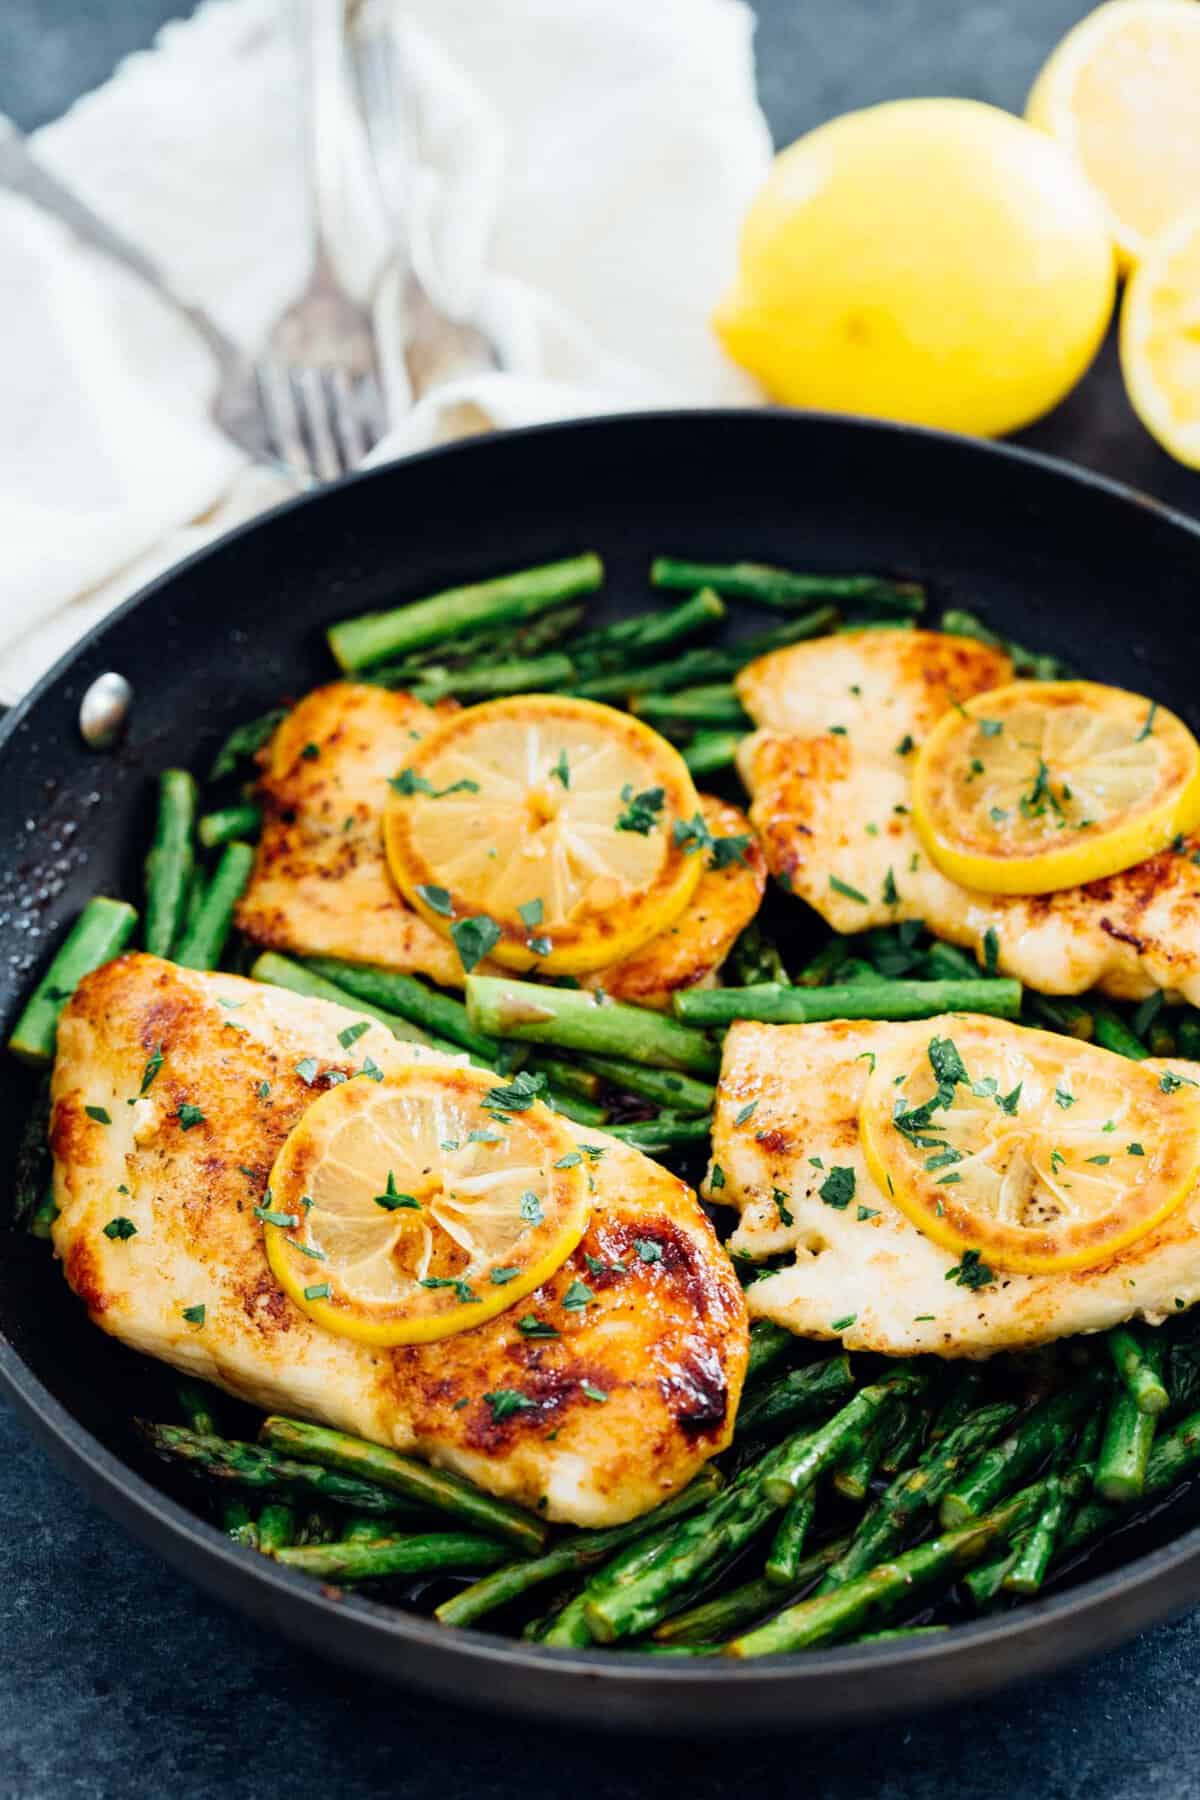 This honey butter lemon chicken with asparagus has some of the freshest ingredients to make a flavorful weeknight dish! This recipe is quick and easy and uses one-skillet! Less mess and easy clean-up!